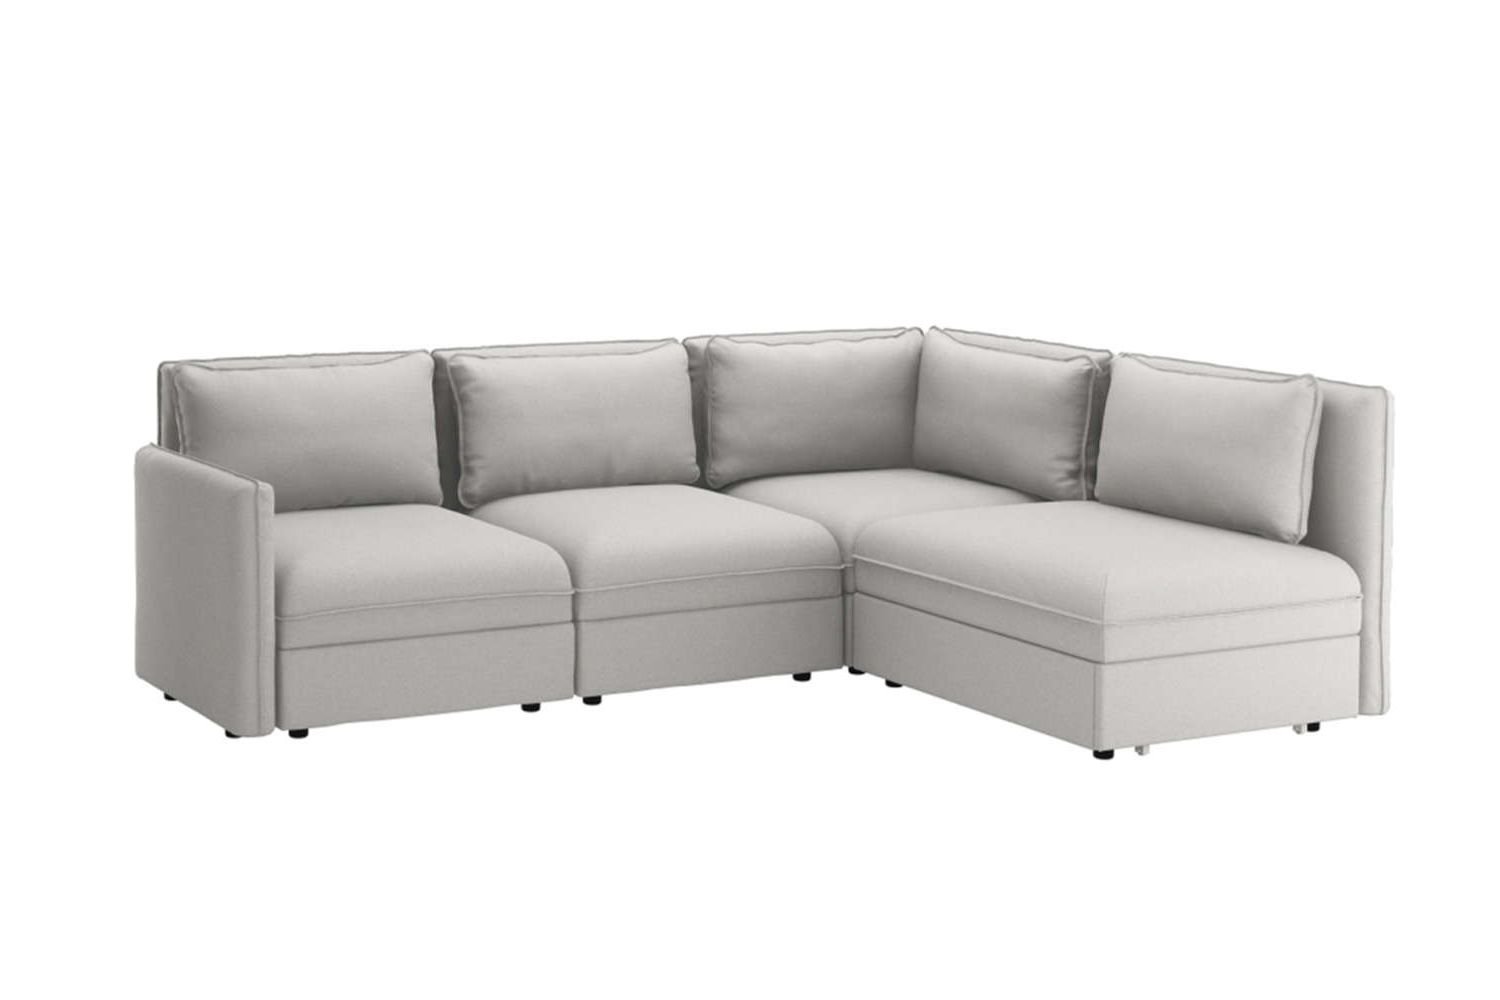 8 Favorites: Surprisingly Attractive Sofas With Storage Regarding Sofa Sectionals With Storage (View 14 of 20)